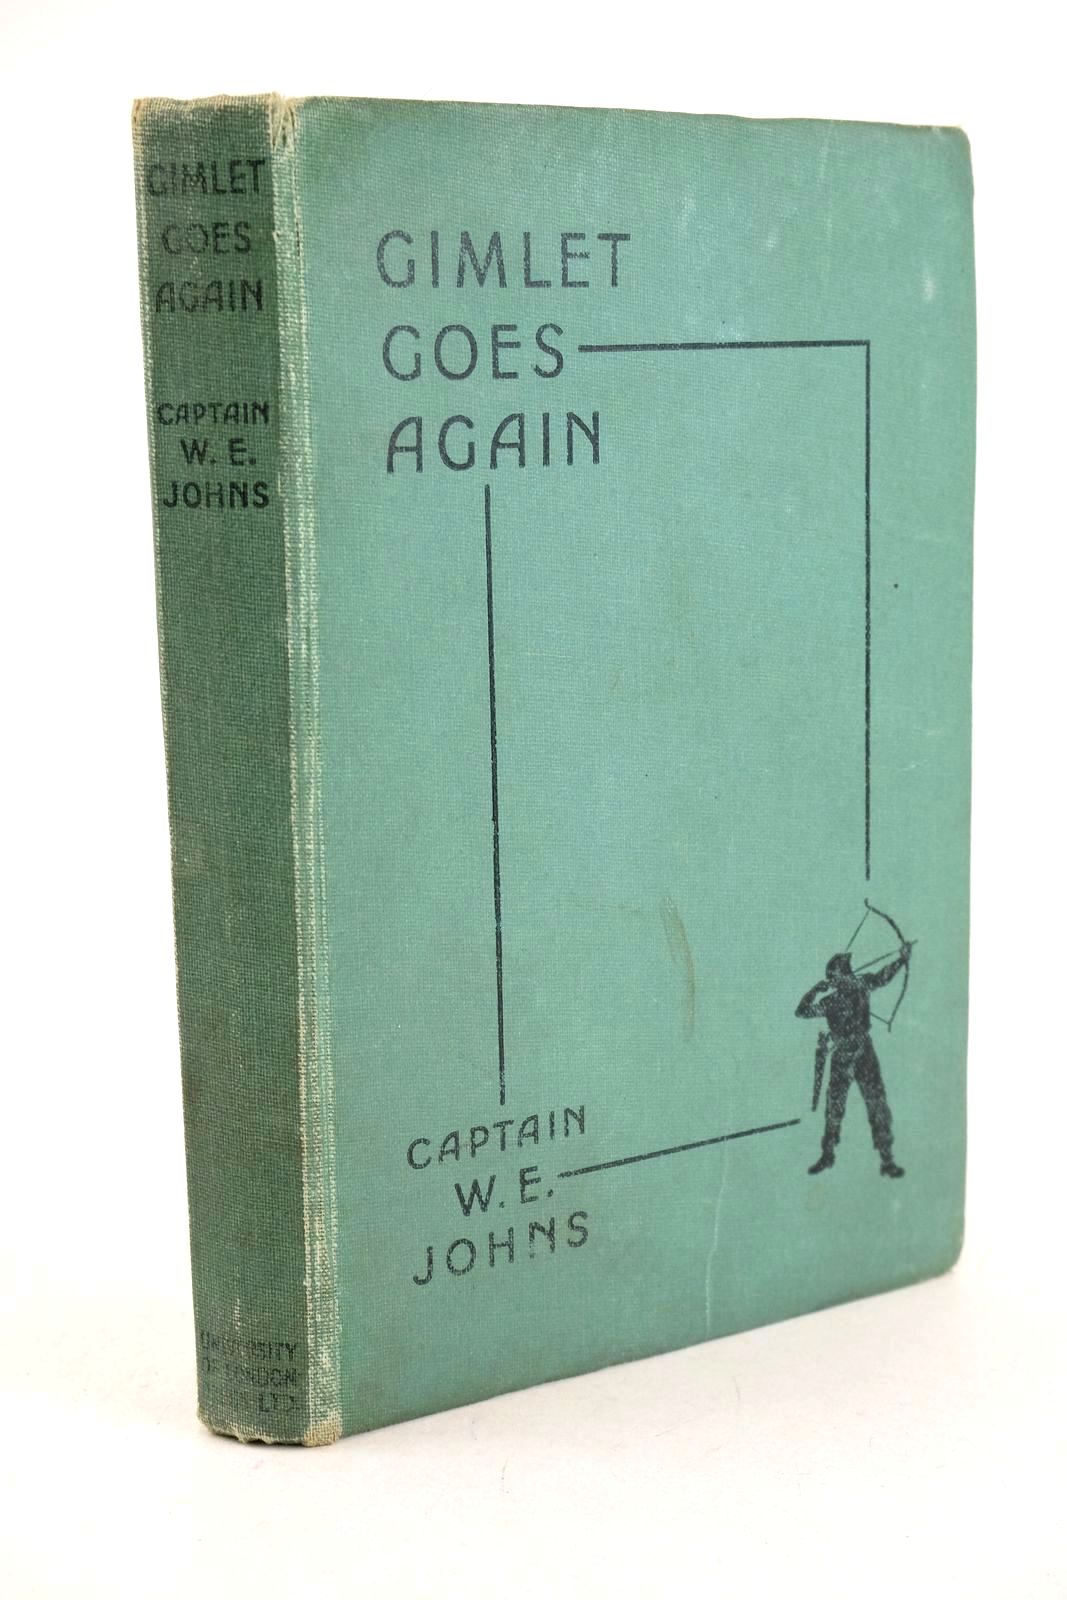 Photo of GIMLET GOES AGAIN written by Johns, W.E. illustrated by Stead,  published by University of London Press (STOCK CODE: 1327203)  for sale by Stella & Rose's Books